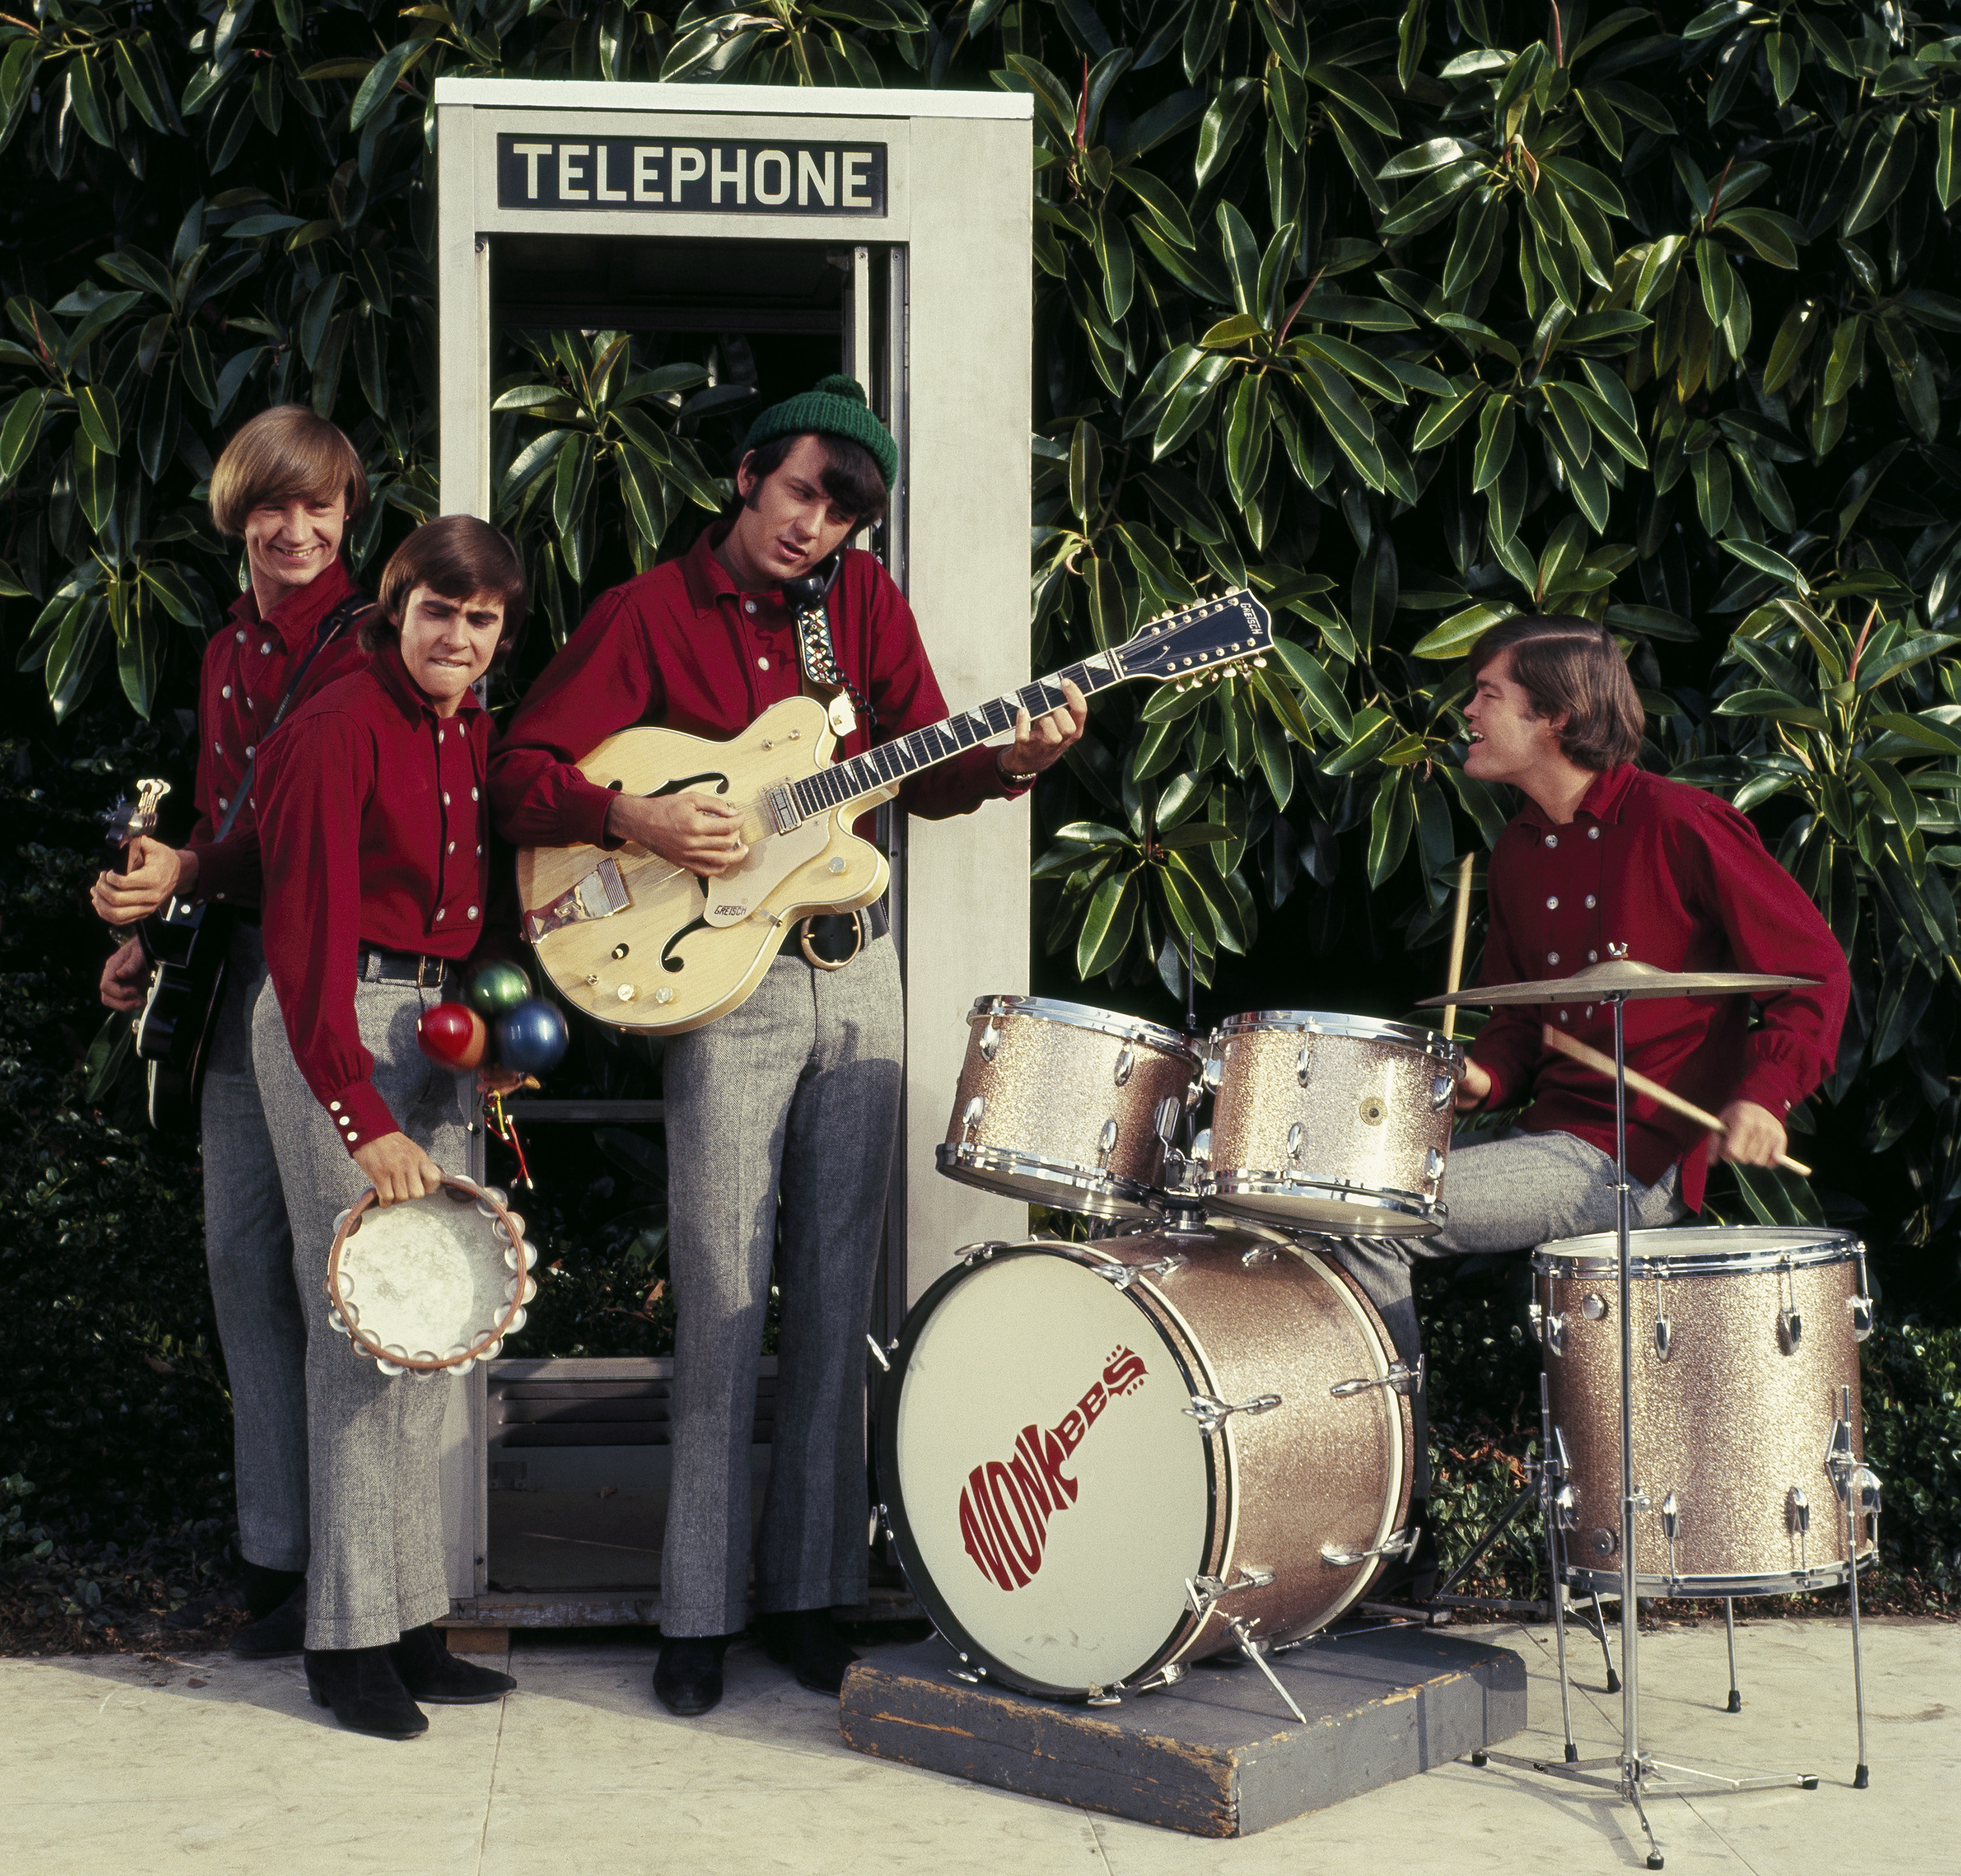 The Monkees' Peter Tork, Davy Jones, Mike Nesmith, and Micky Dolenz near plants during the 